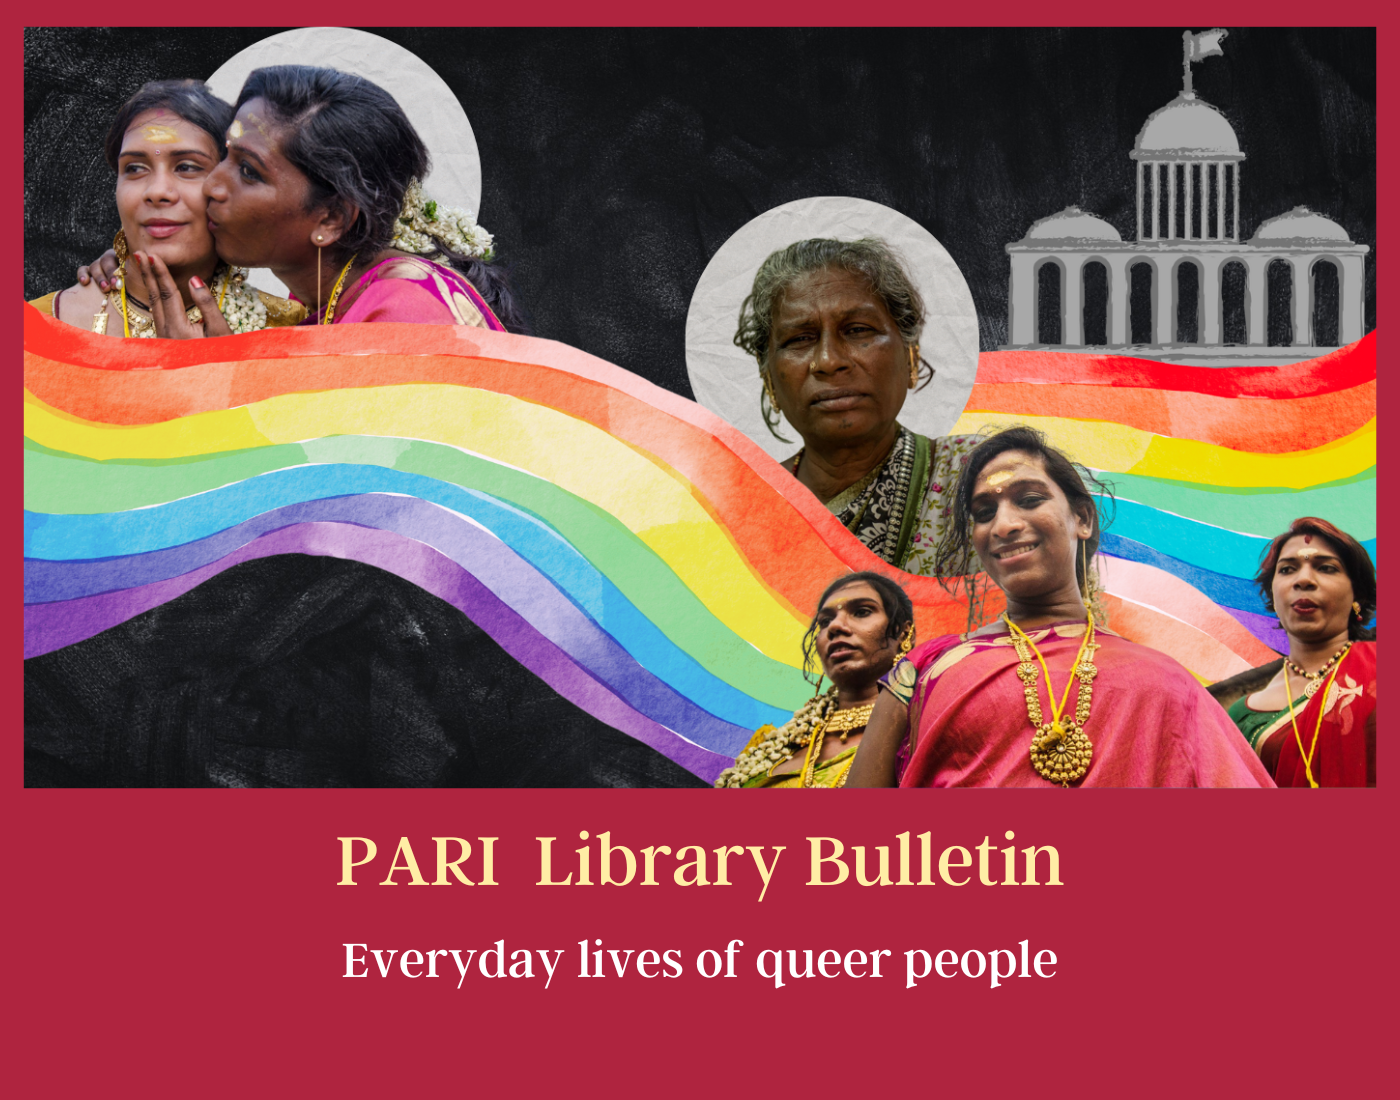 PARI Library Bulletin - Everyday lives of queer people.png